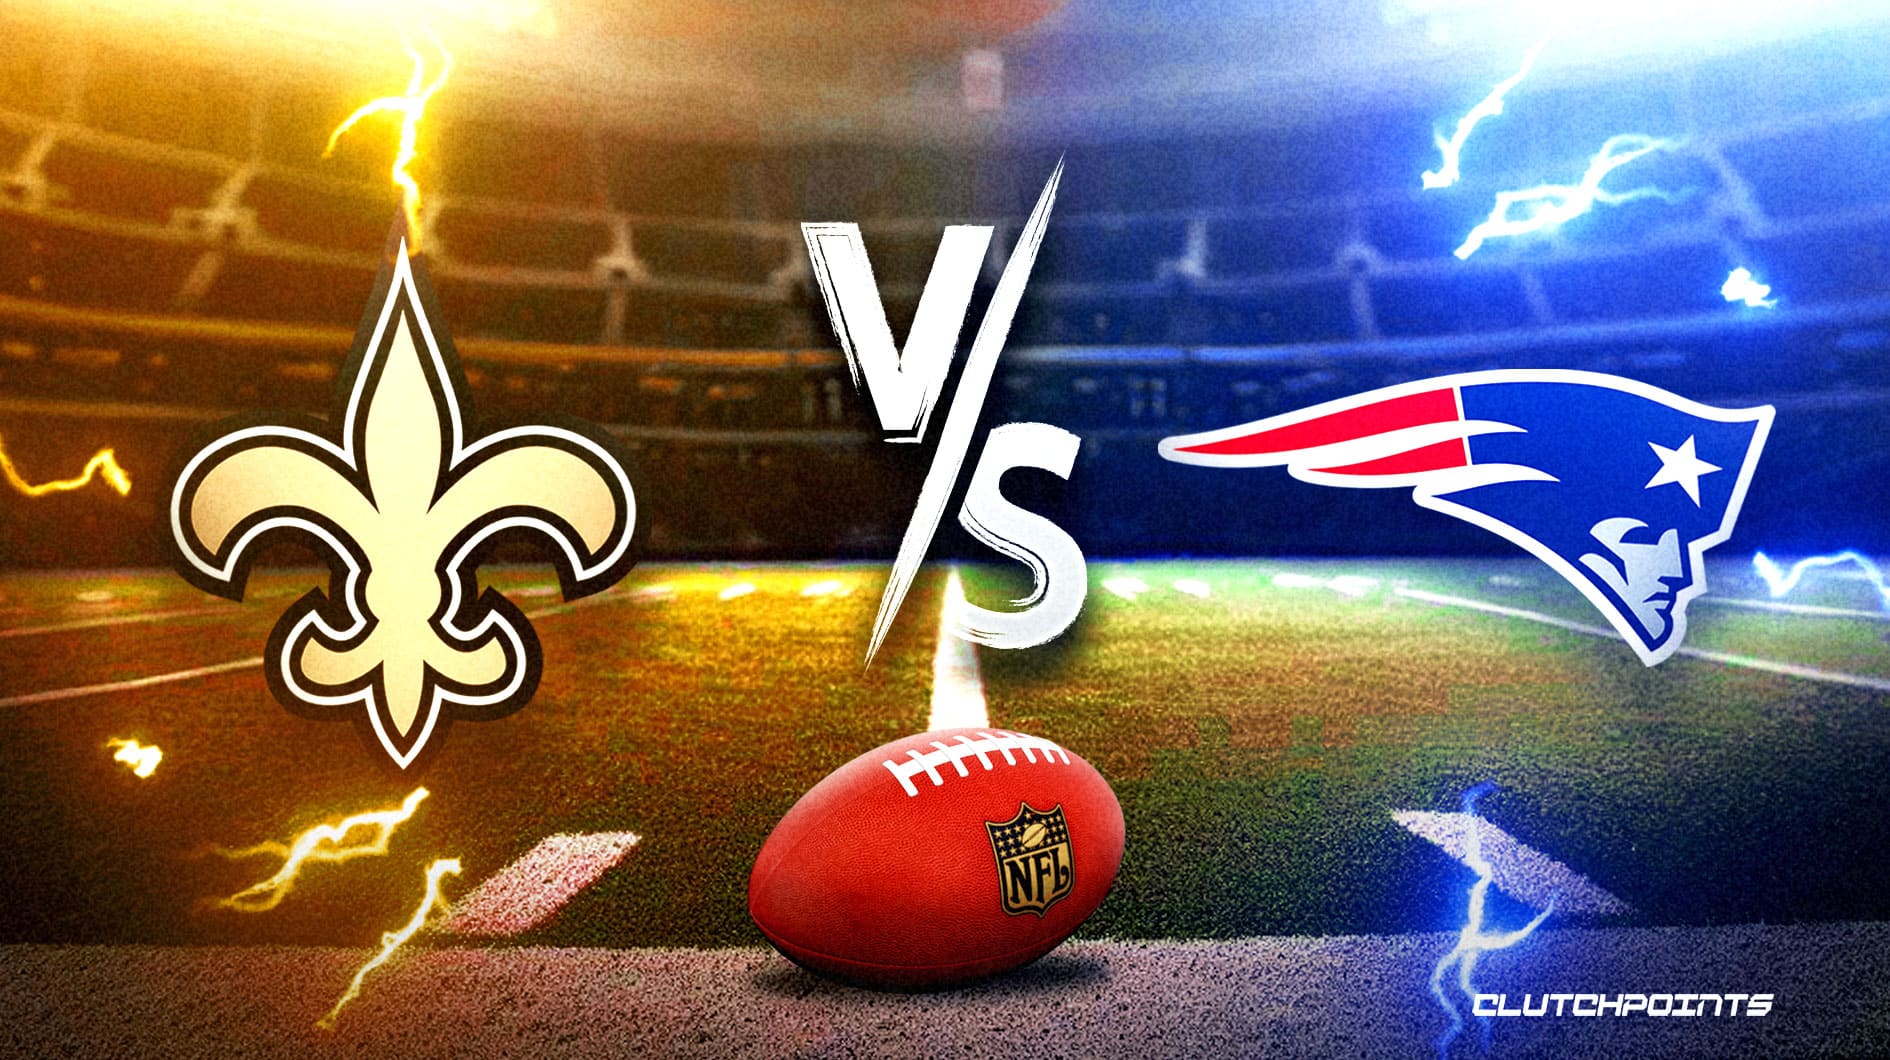 New Orleans Saints move to 2-0 as they nip the Carolina Panthers